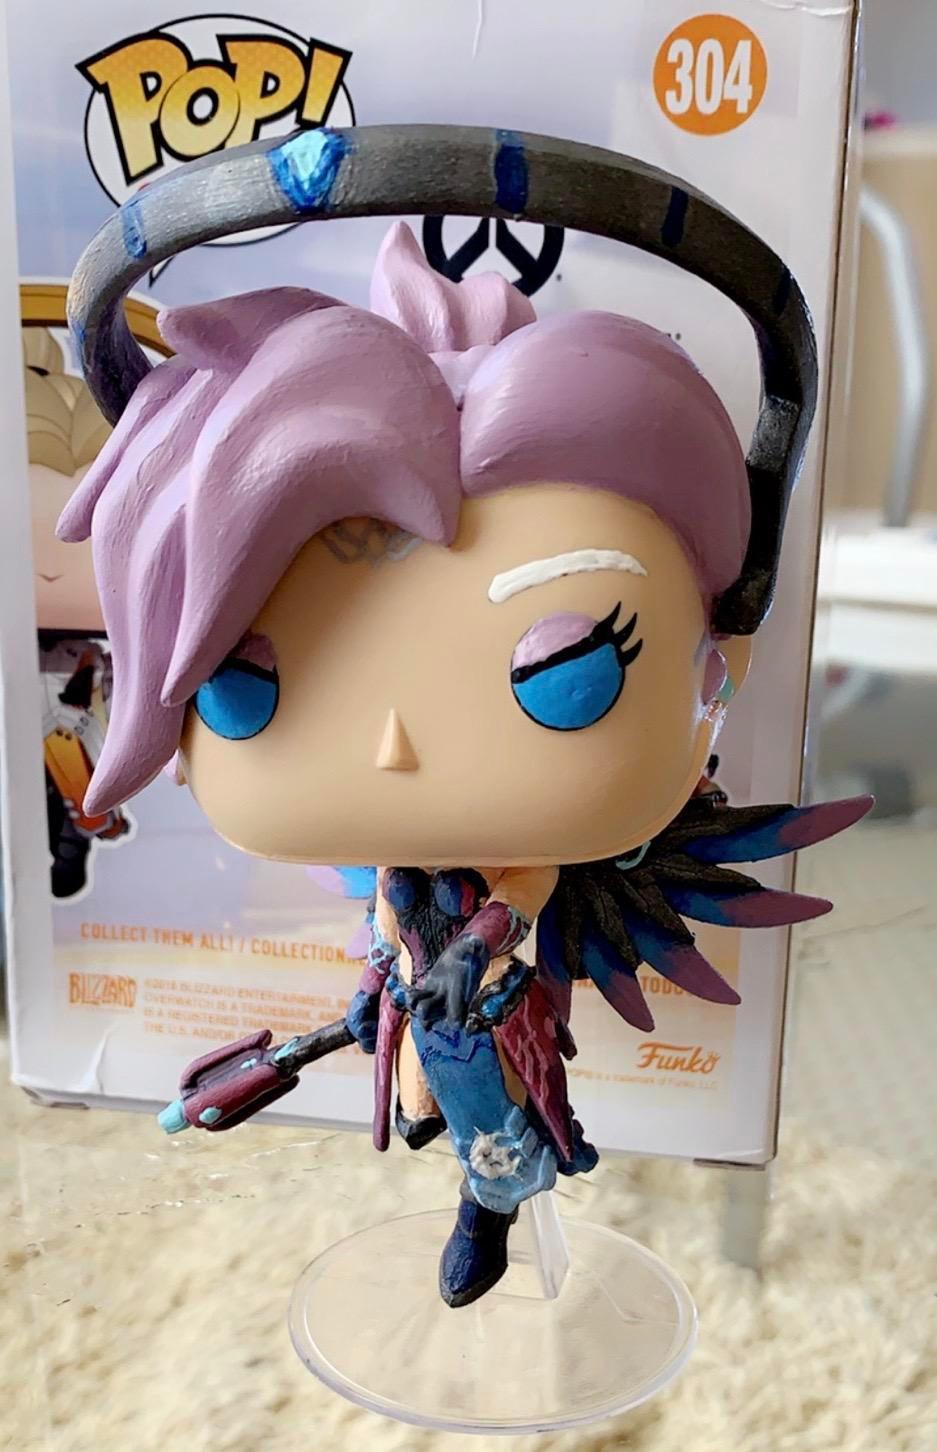 gruppe Hammer offset Overwatch player shares epic skin redesigns for Mercy Funko POP! figures -  Dexerto